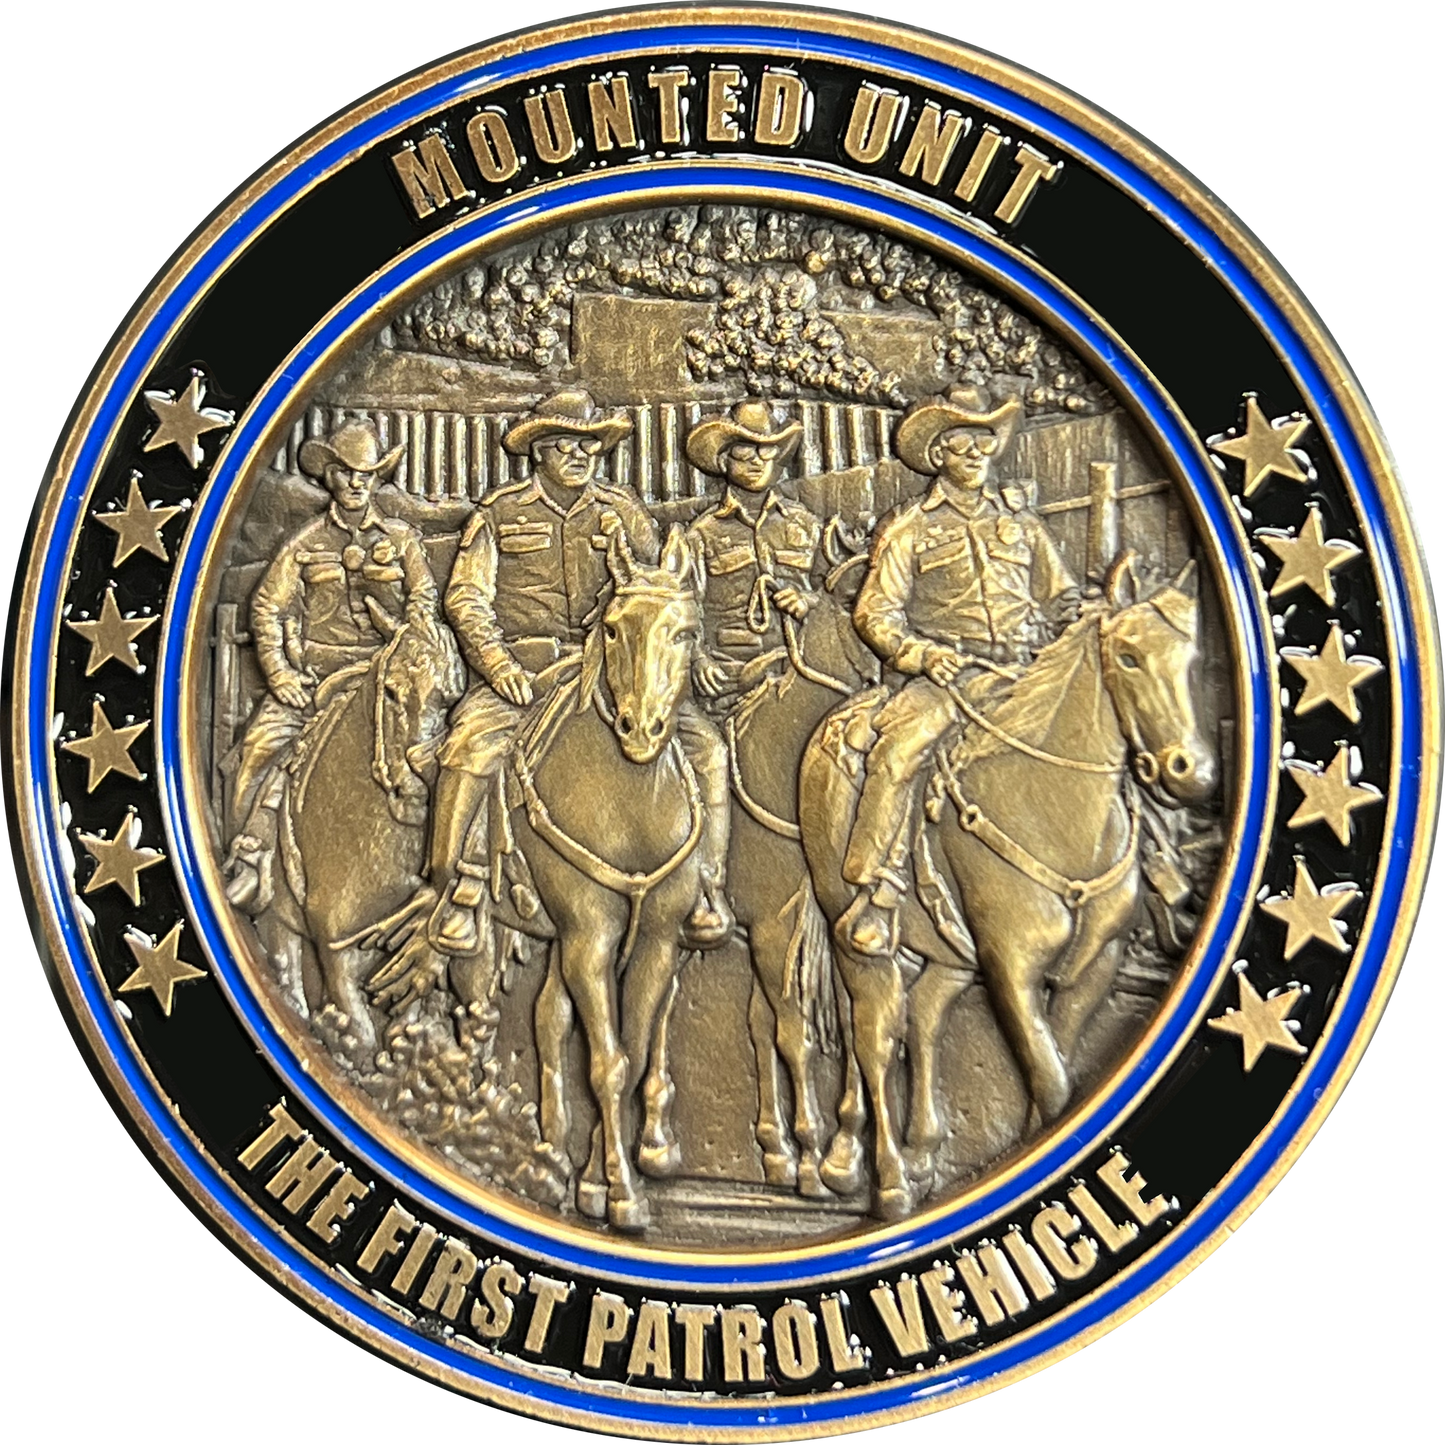 discontinued GL3-004 10 Foot Tall Cops Police NYPD LAPD Davie CBP Border Patrol Horse Patrol Mounted Unit Challenge Coin